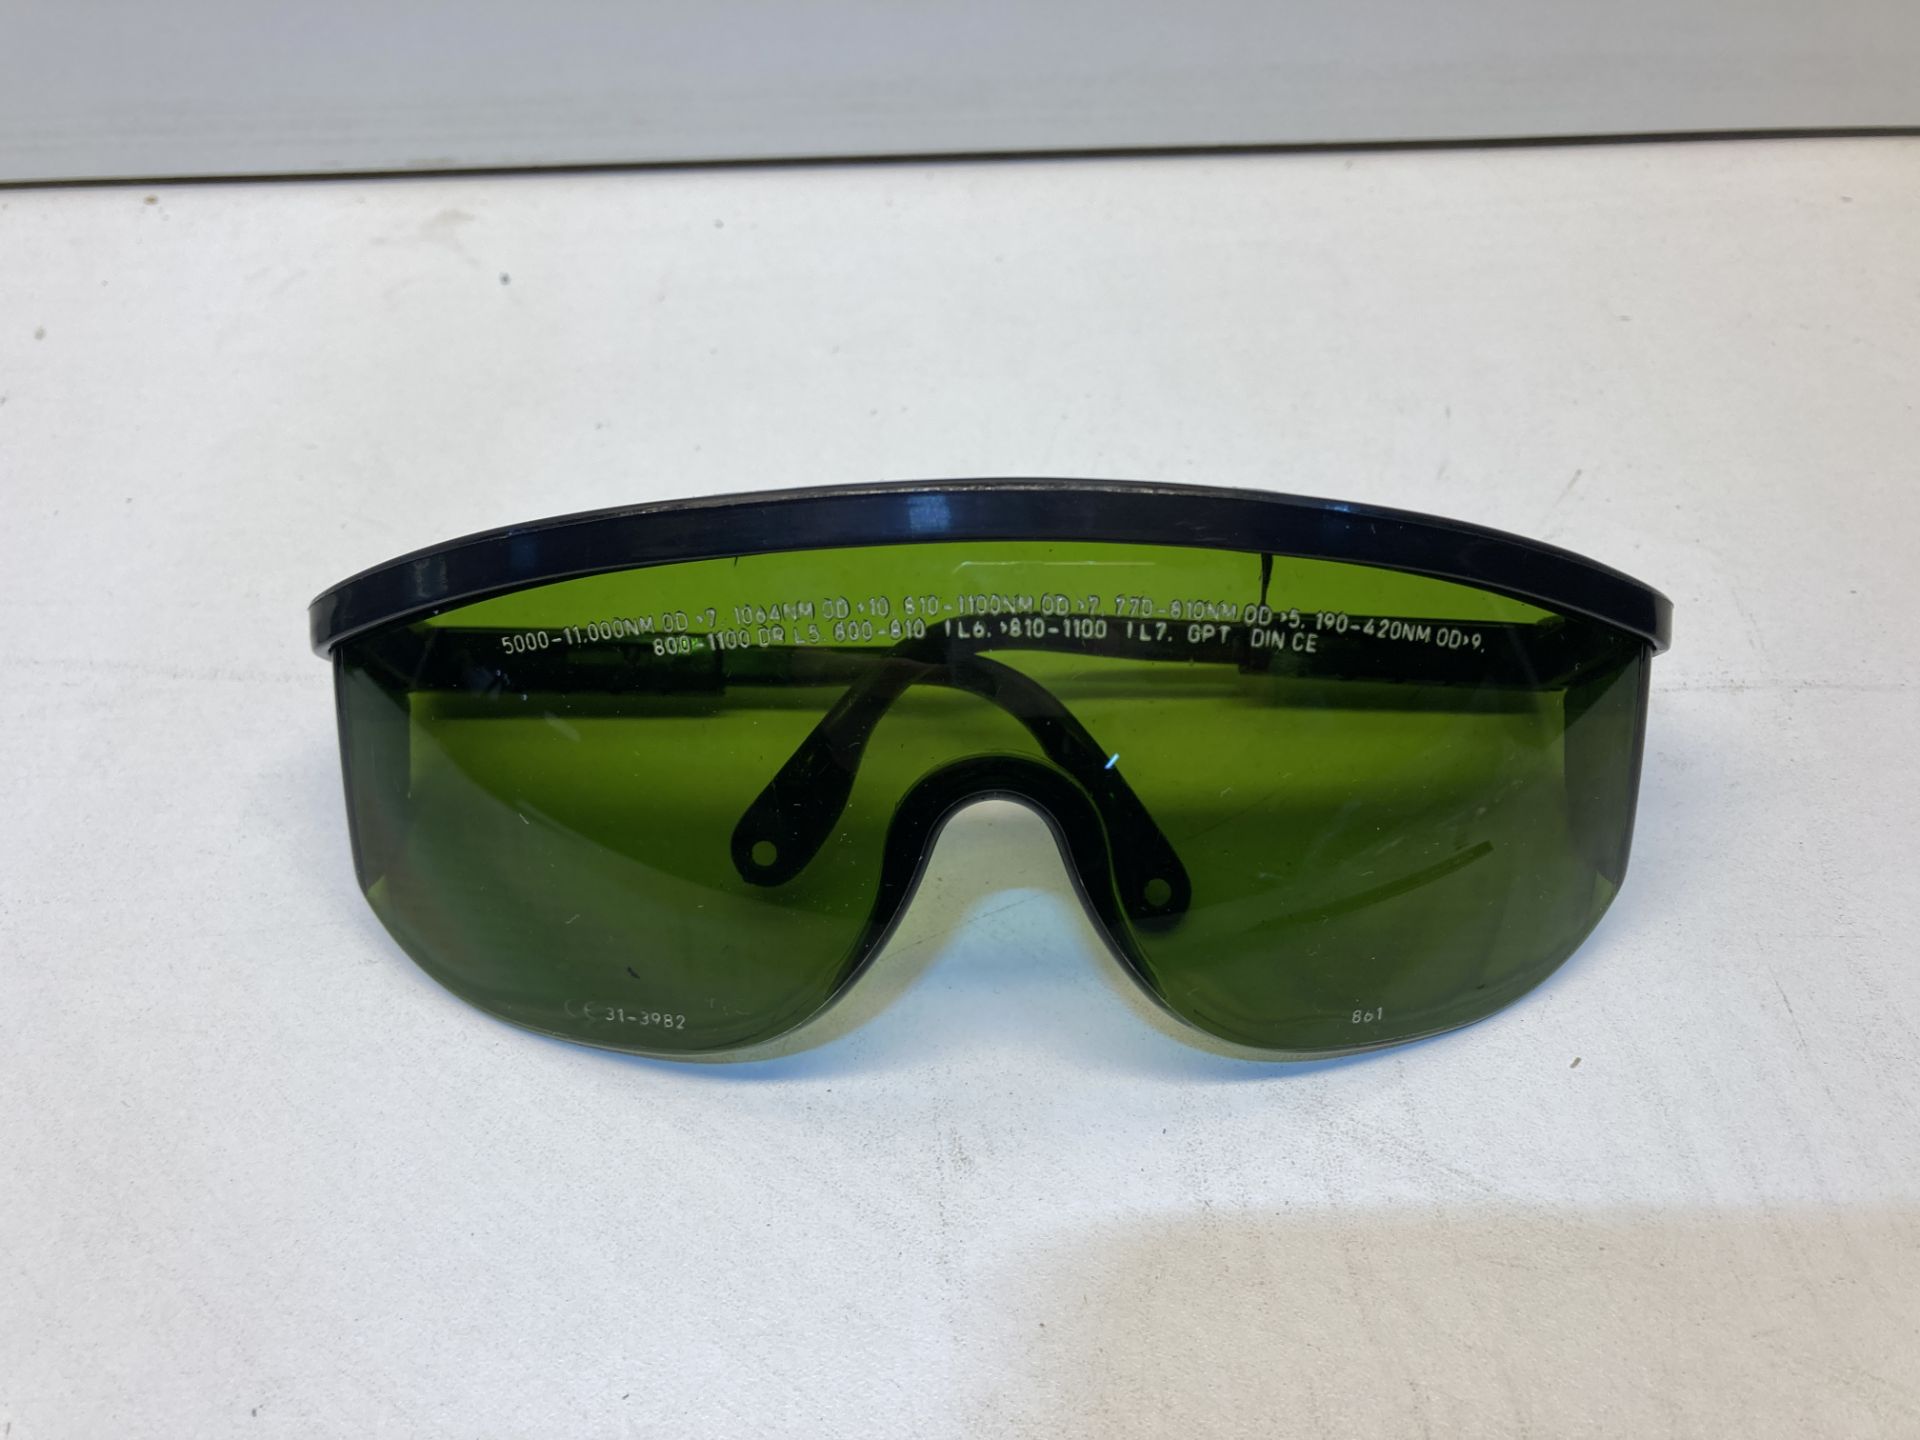 2 Pairs of Protective Glasses in Zip-Up Cases - Image 2 of 6